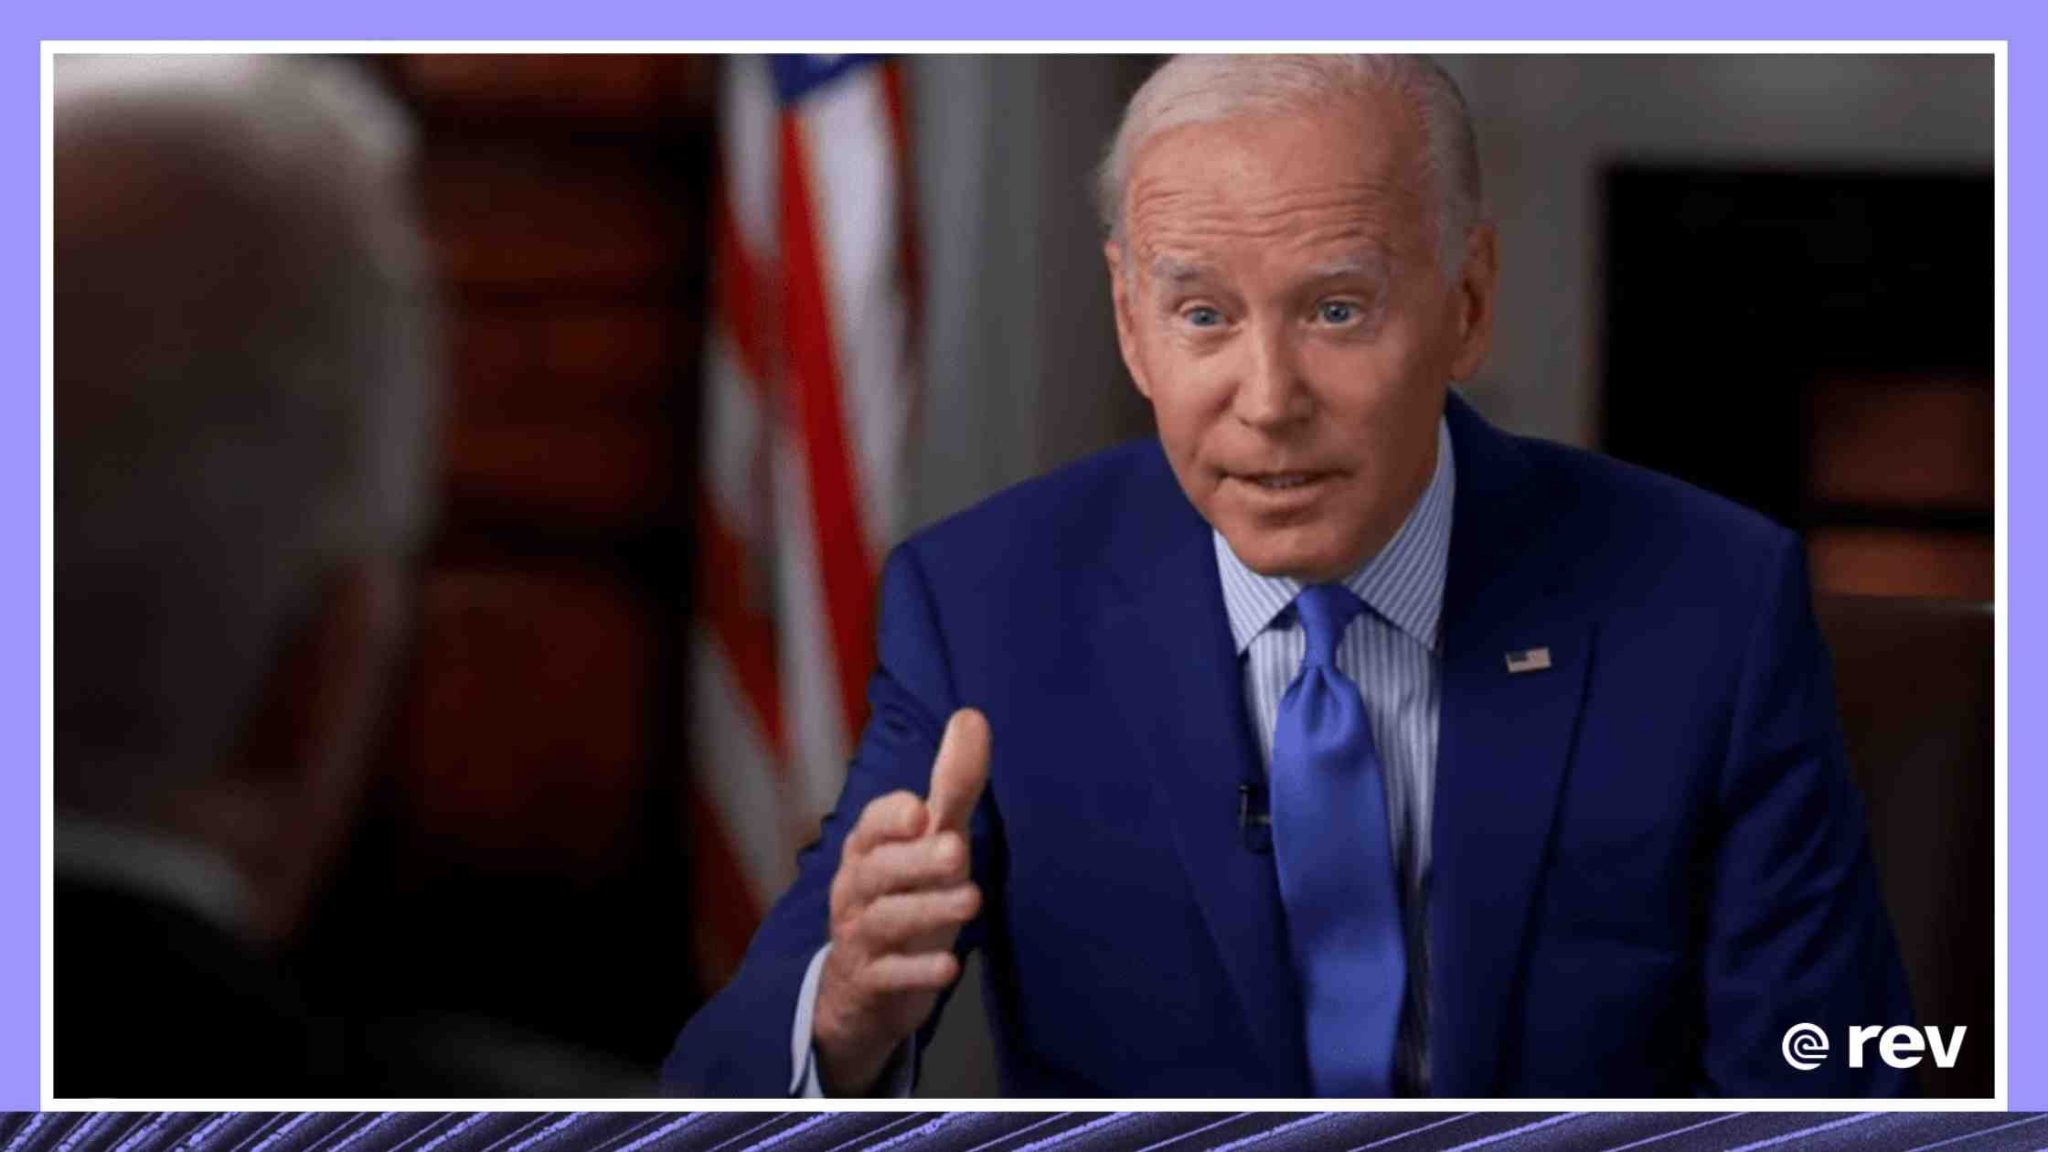 Biden is on track to have a record number of women in his Cabinet